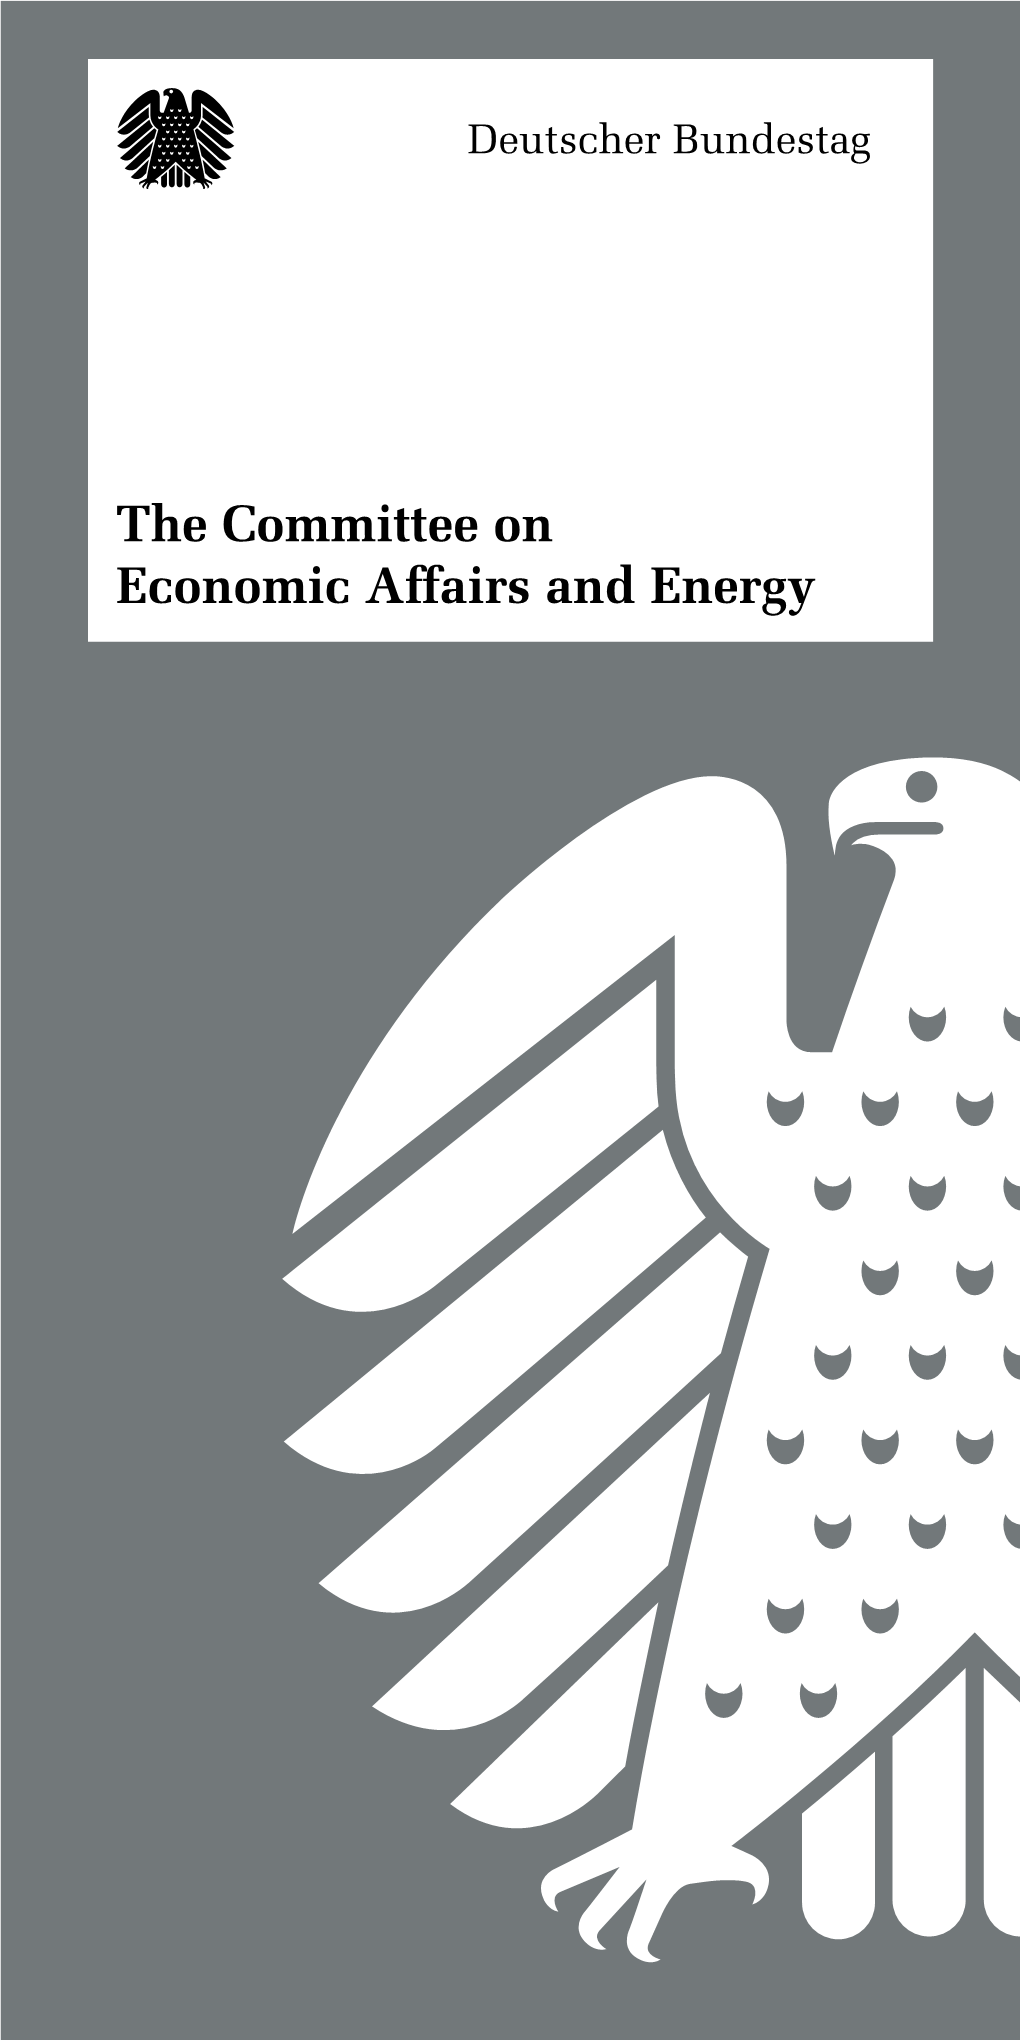 The Committee on Economic Affairs and Energy 2 “There Is More to Economic Affairs Than the Competitiveness of a Few Large Companies